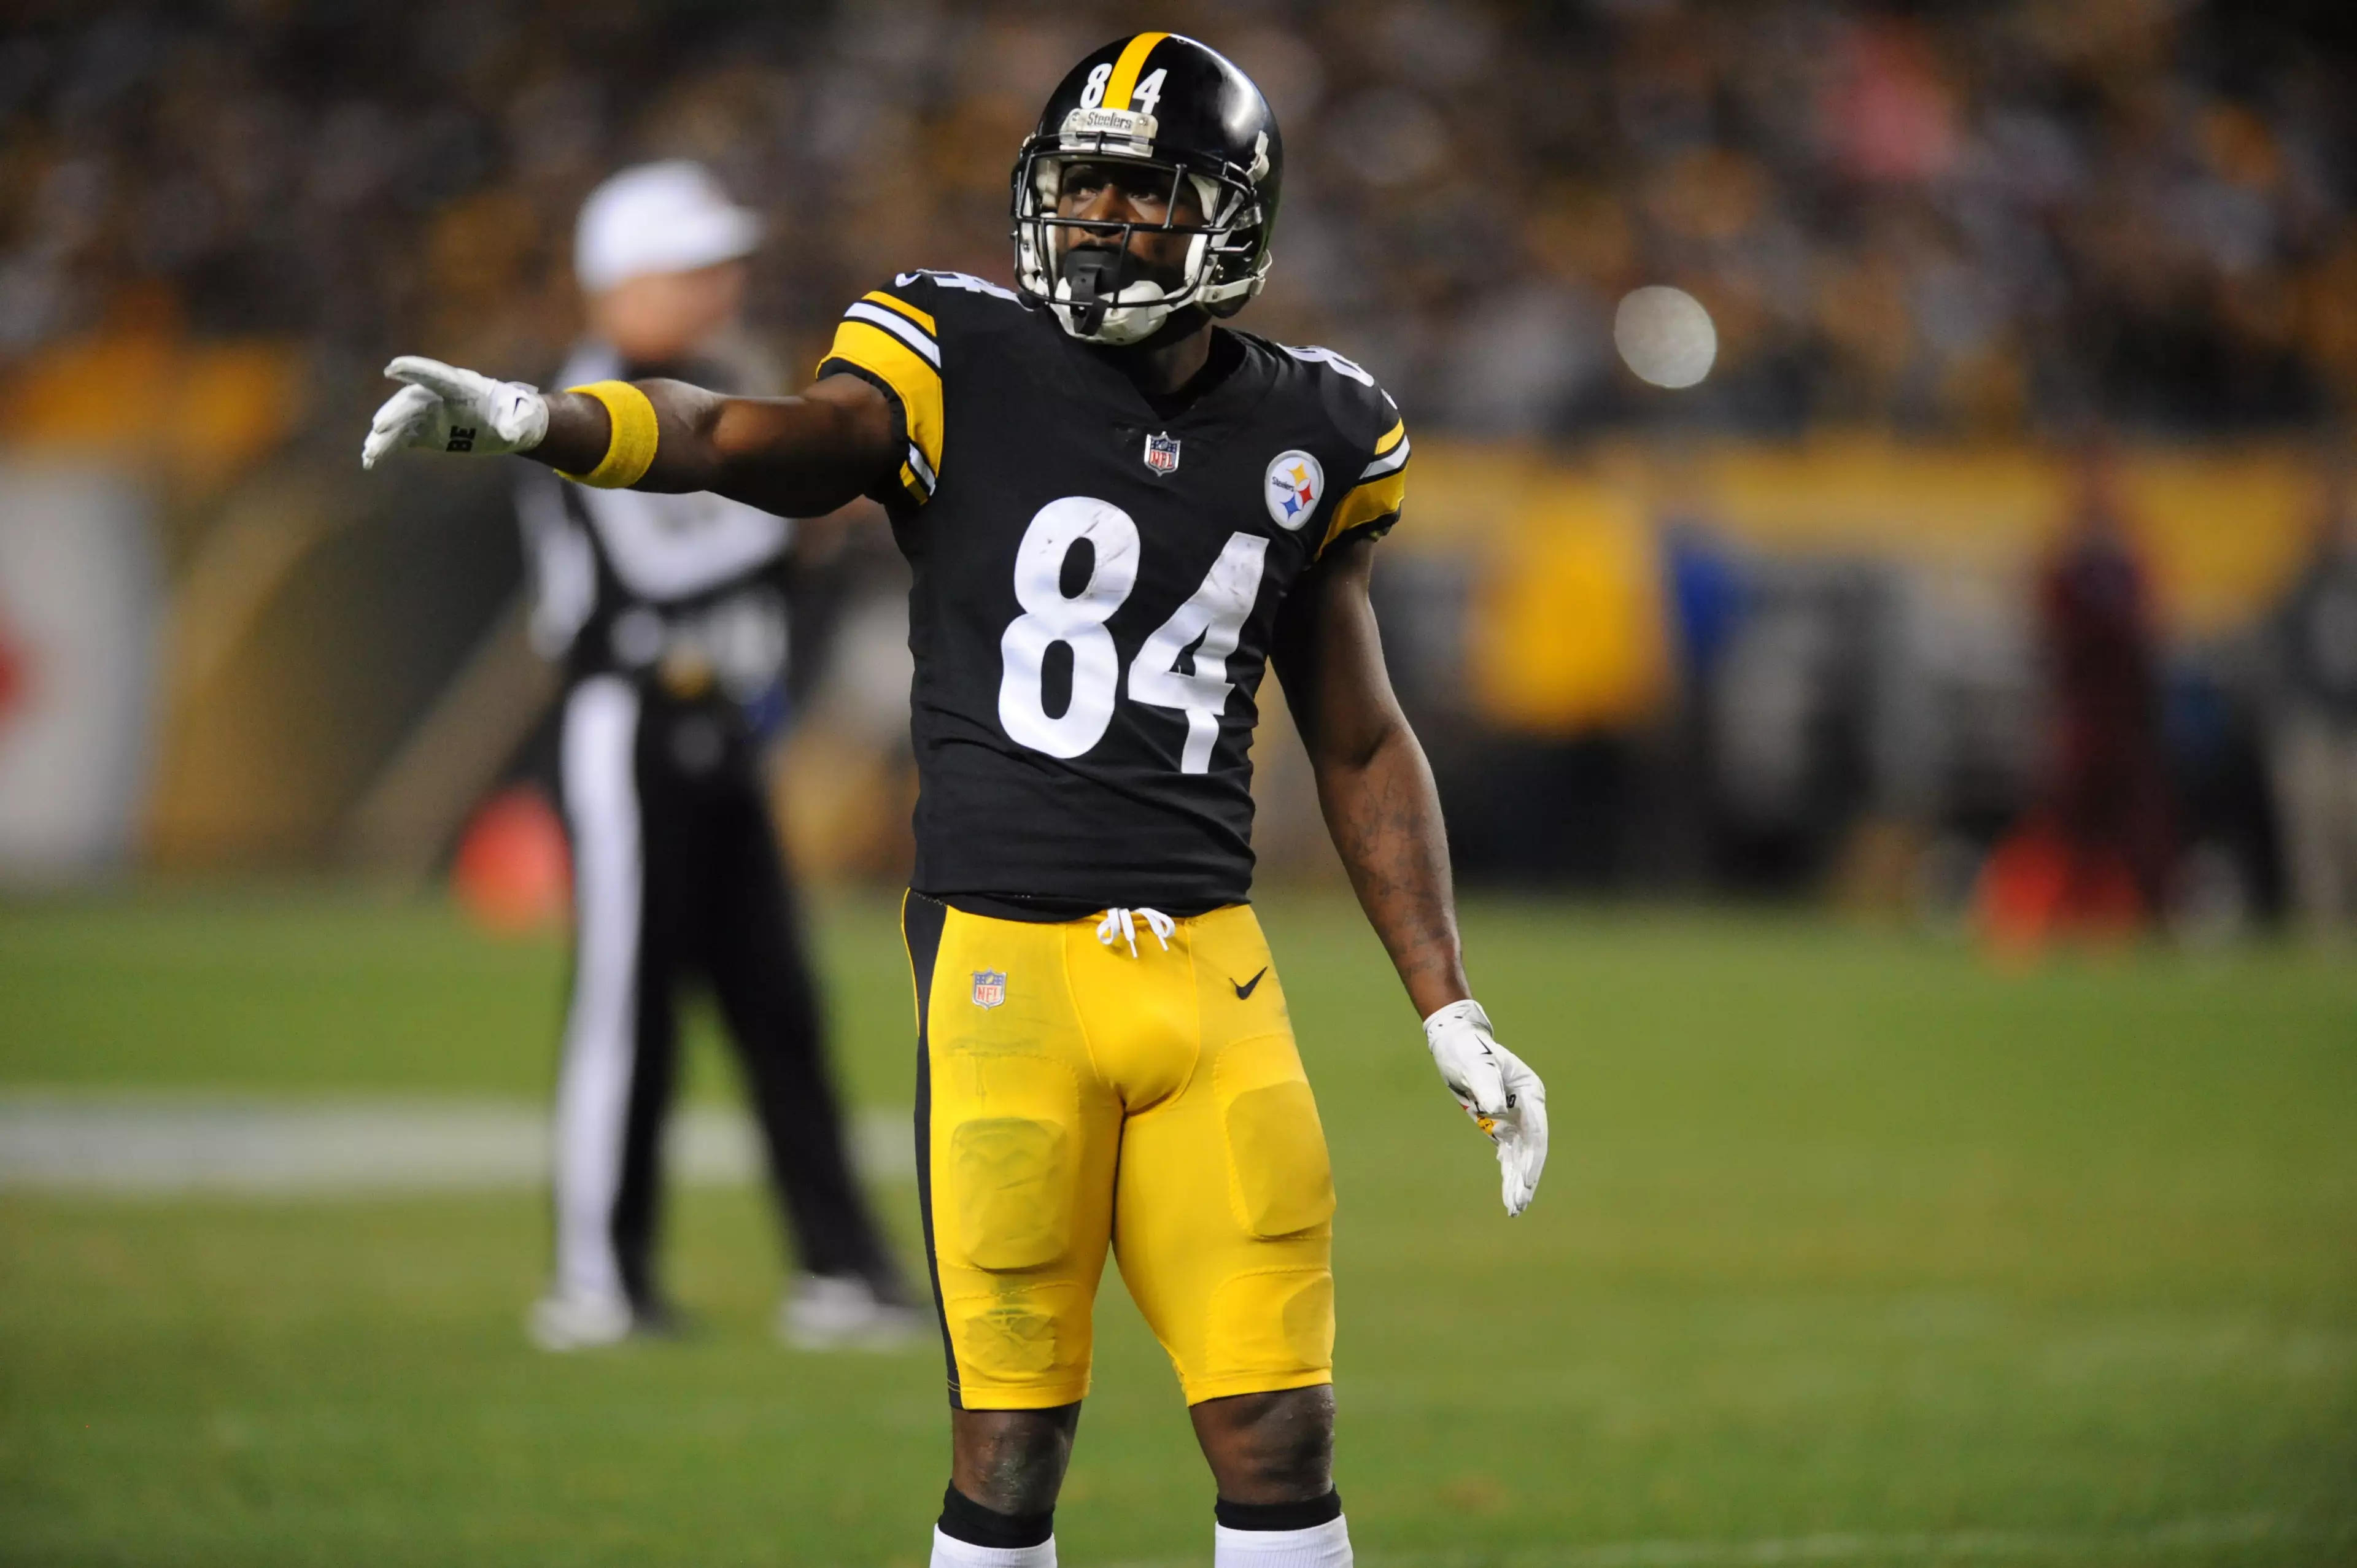 Antonio Brown playing for the Steelers.